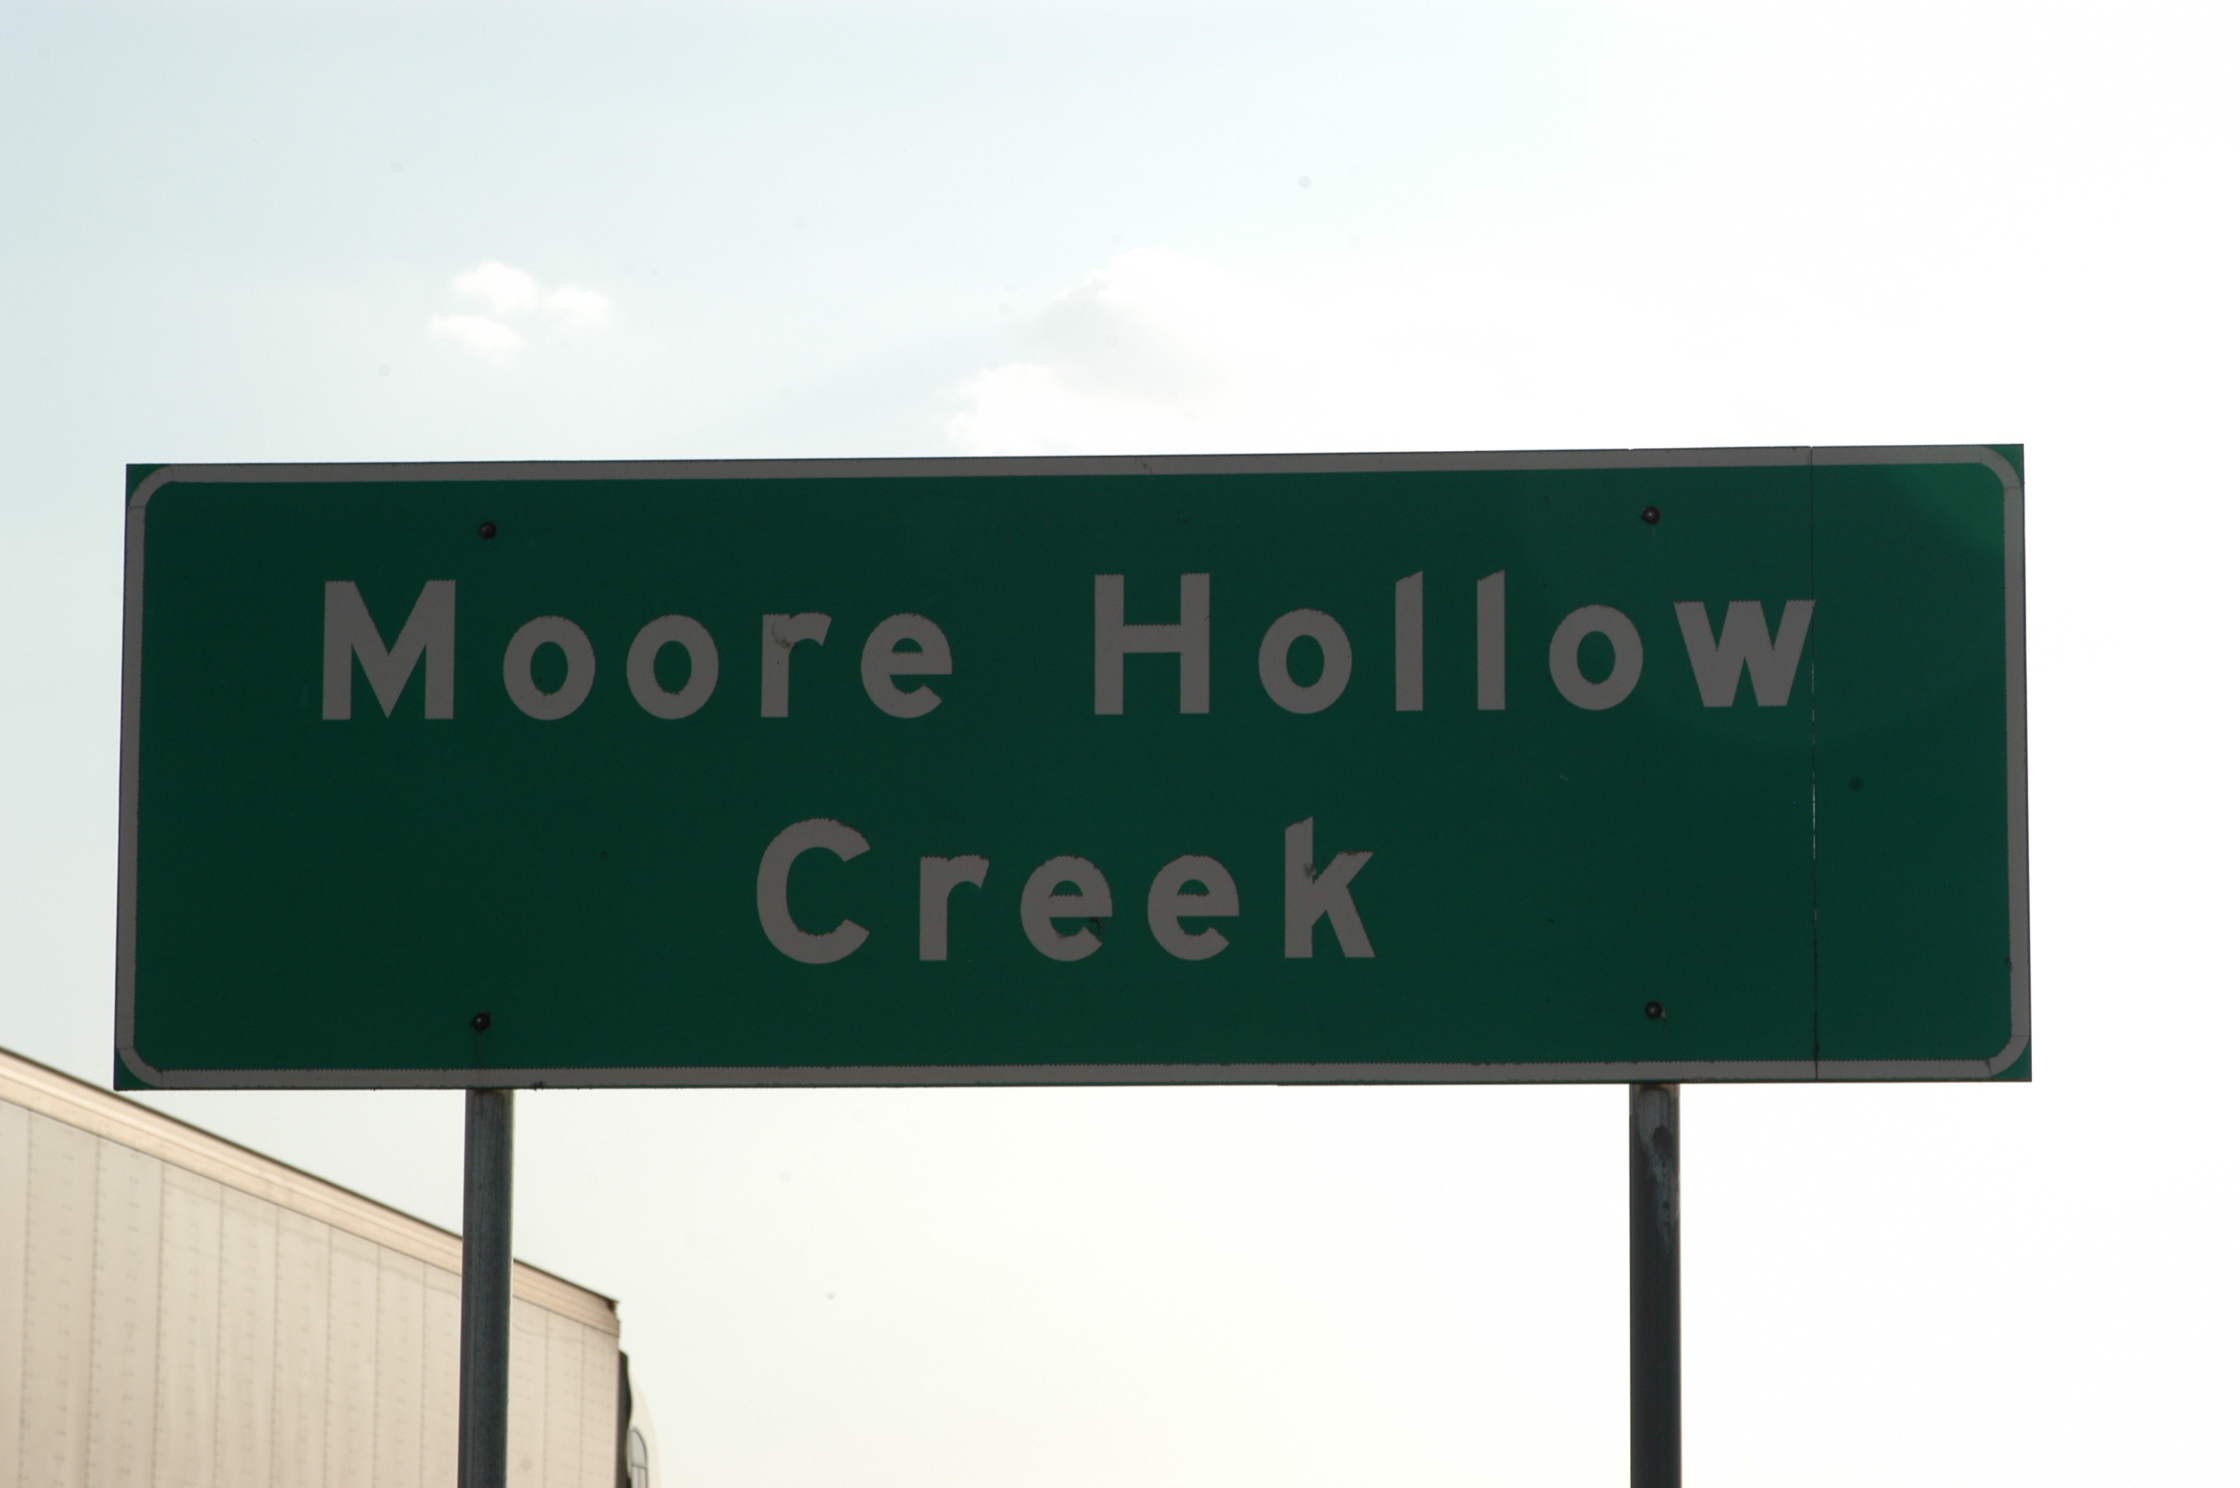 Moore Hollow Creek sign